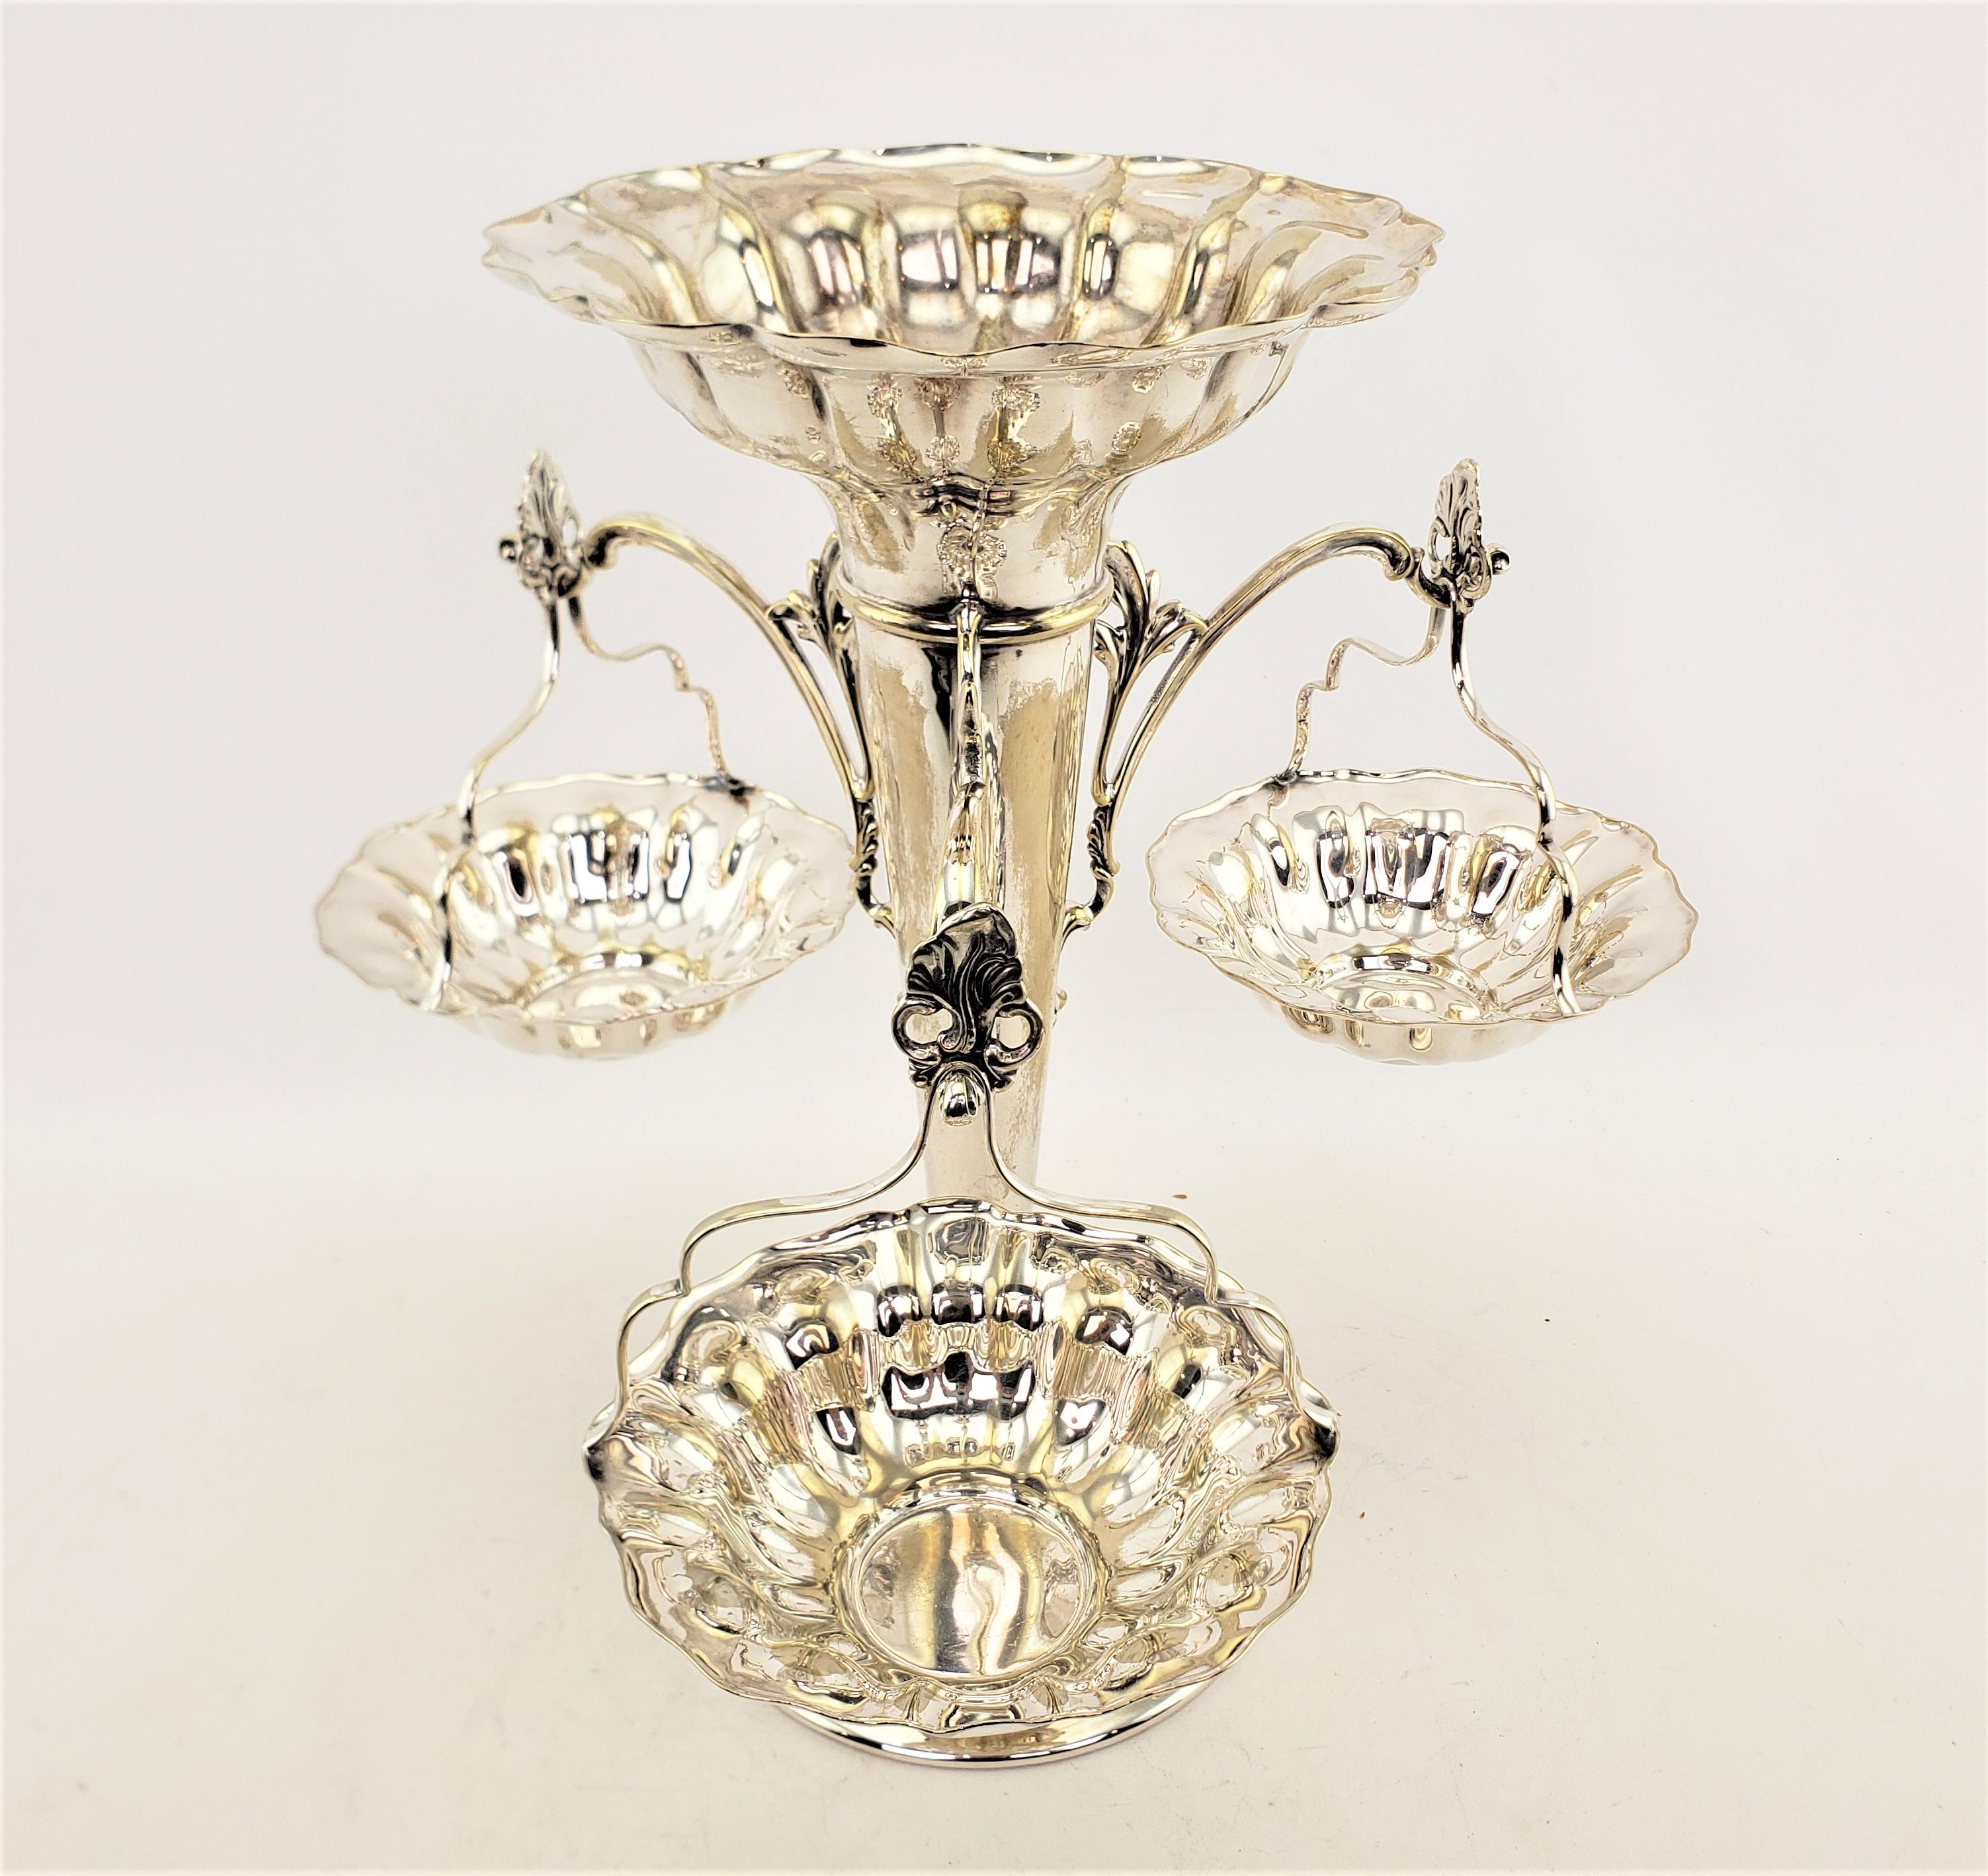 Antique English Elkington Silver Plated Epergne or Centerpiece with Side Baskets For Sale 3